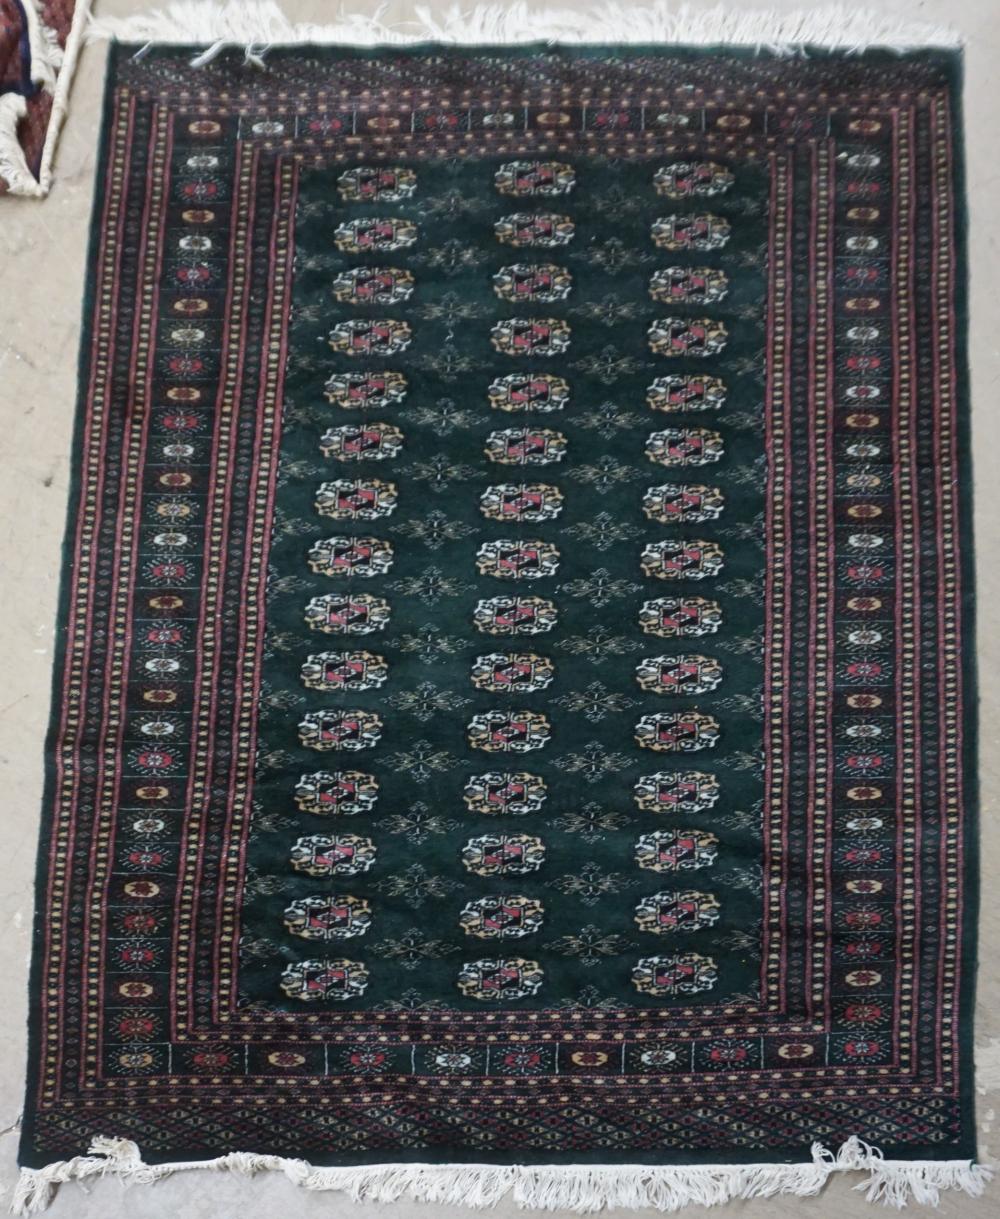 PAKISTAN BOKHARA RUG 6 FT 3 IN 32e1d9